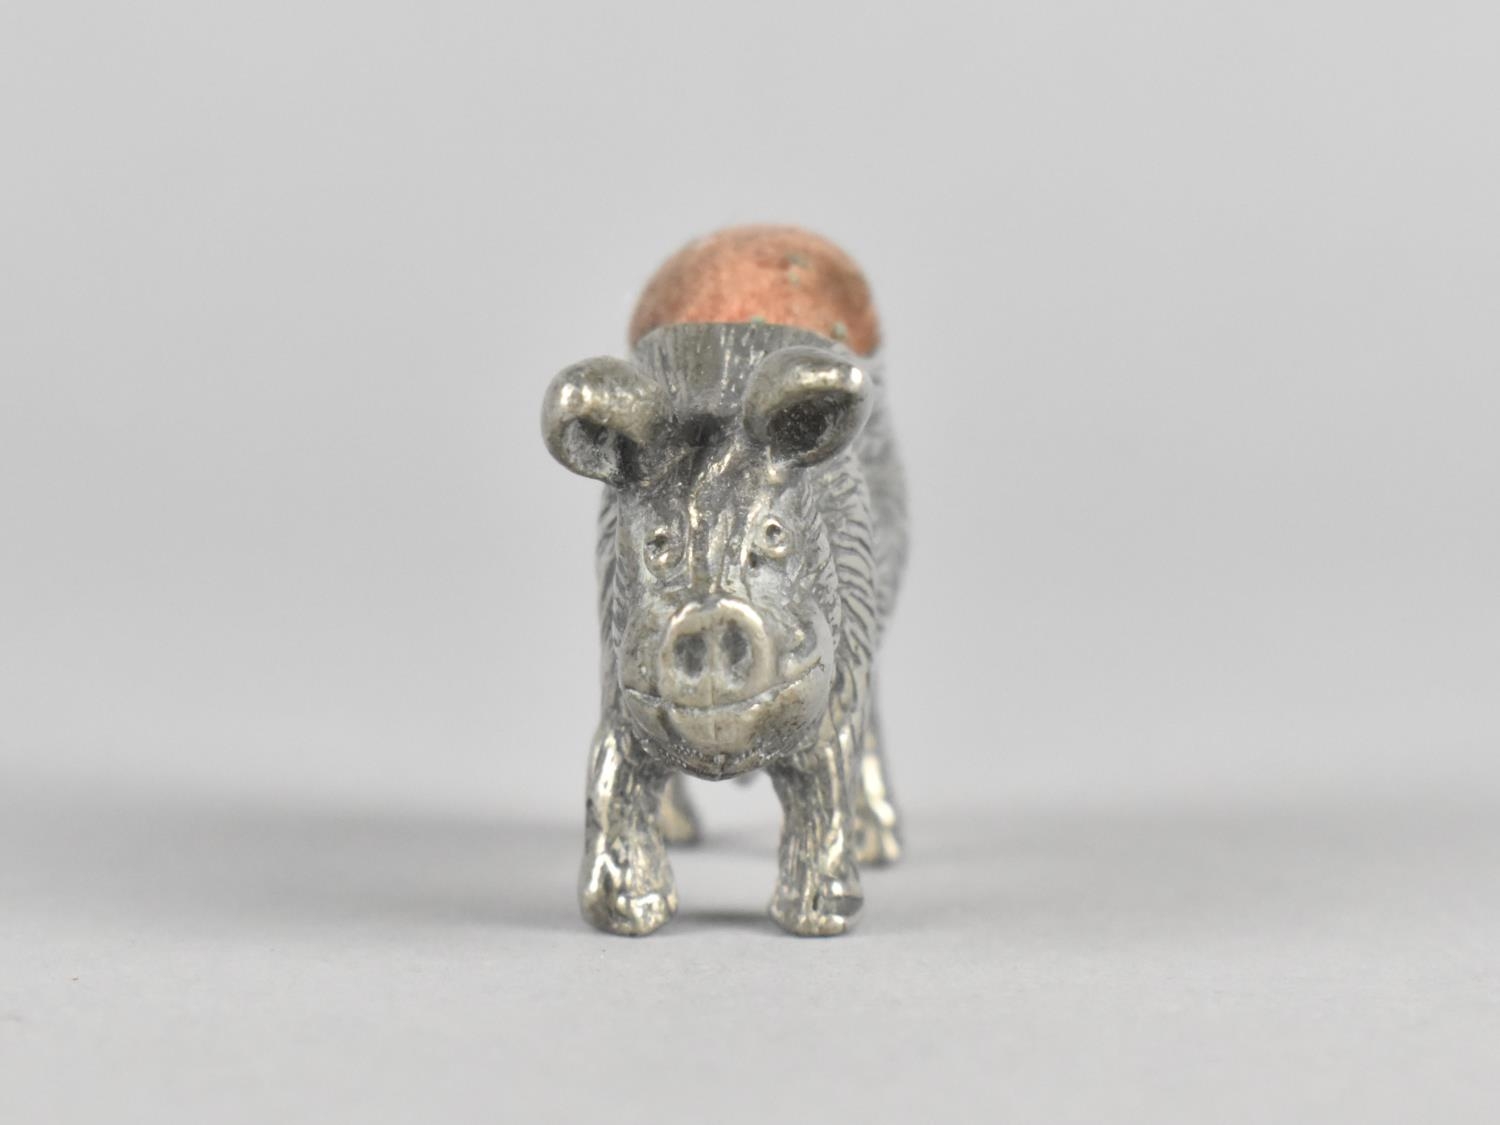 A Small Metal Pincushion Modelled as a Boar, 4cms Long, 2.5cms High - Image 2 of 5